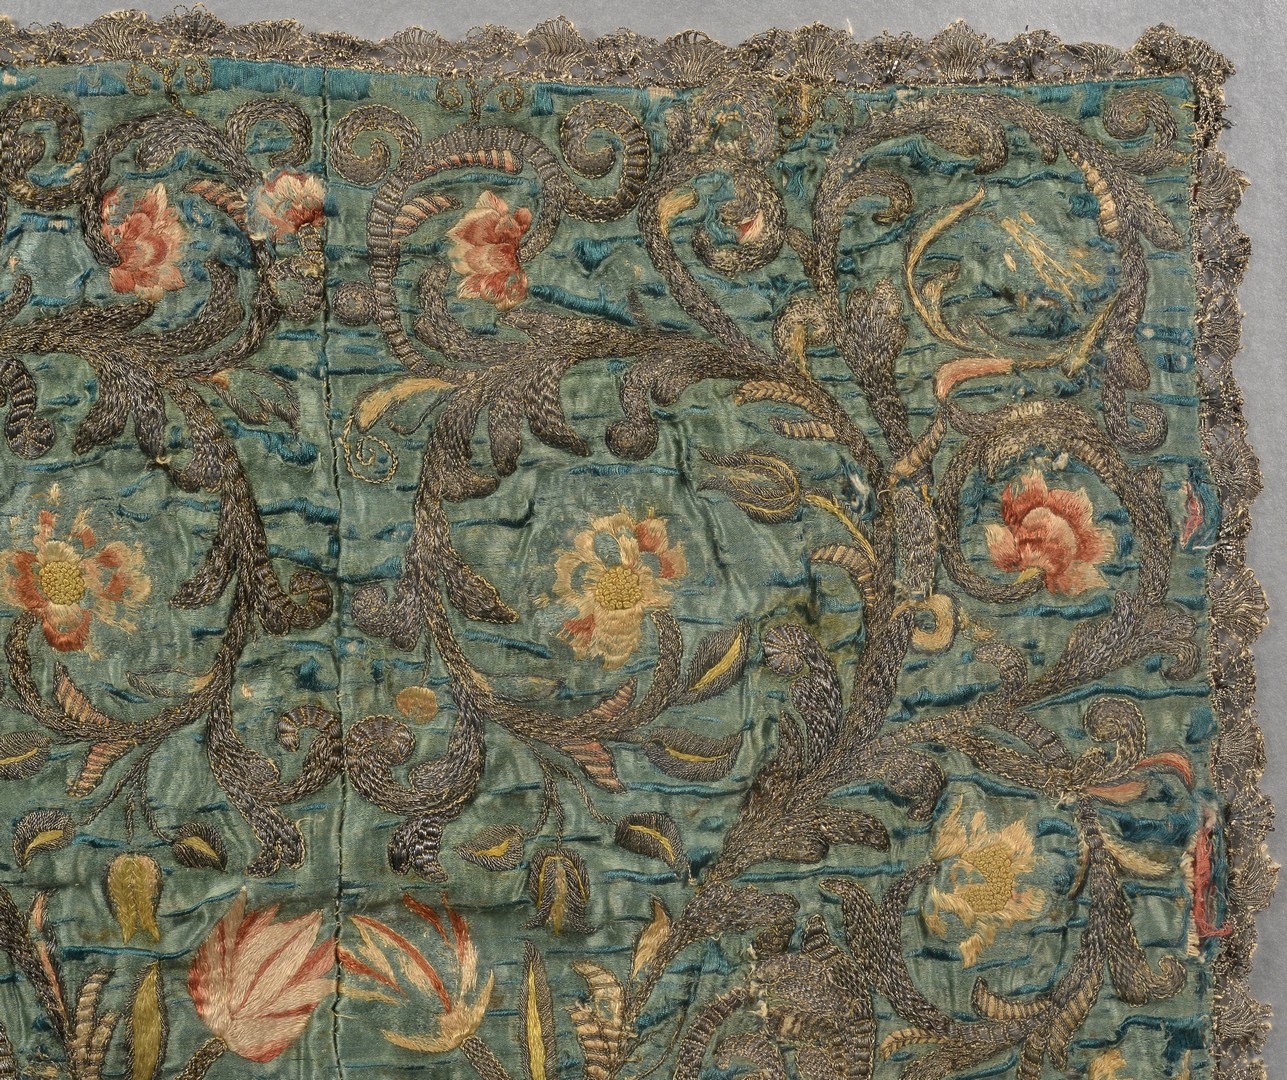 Lot 261: 2 Framed Italian Embroidered Textiles